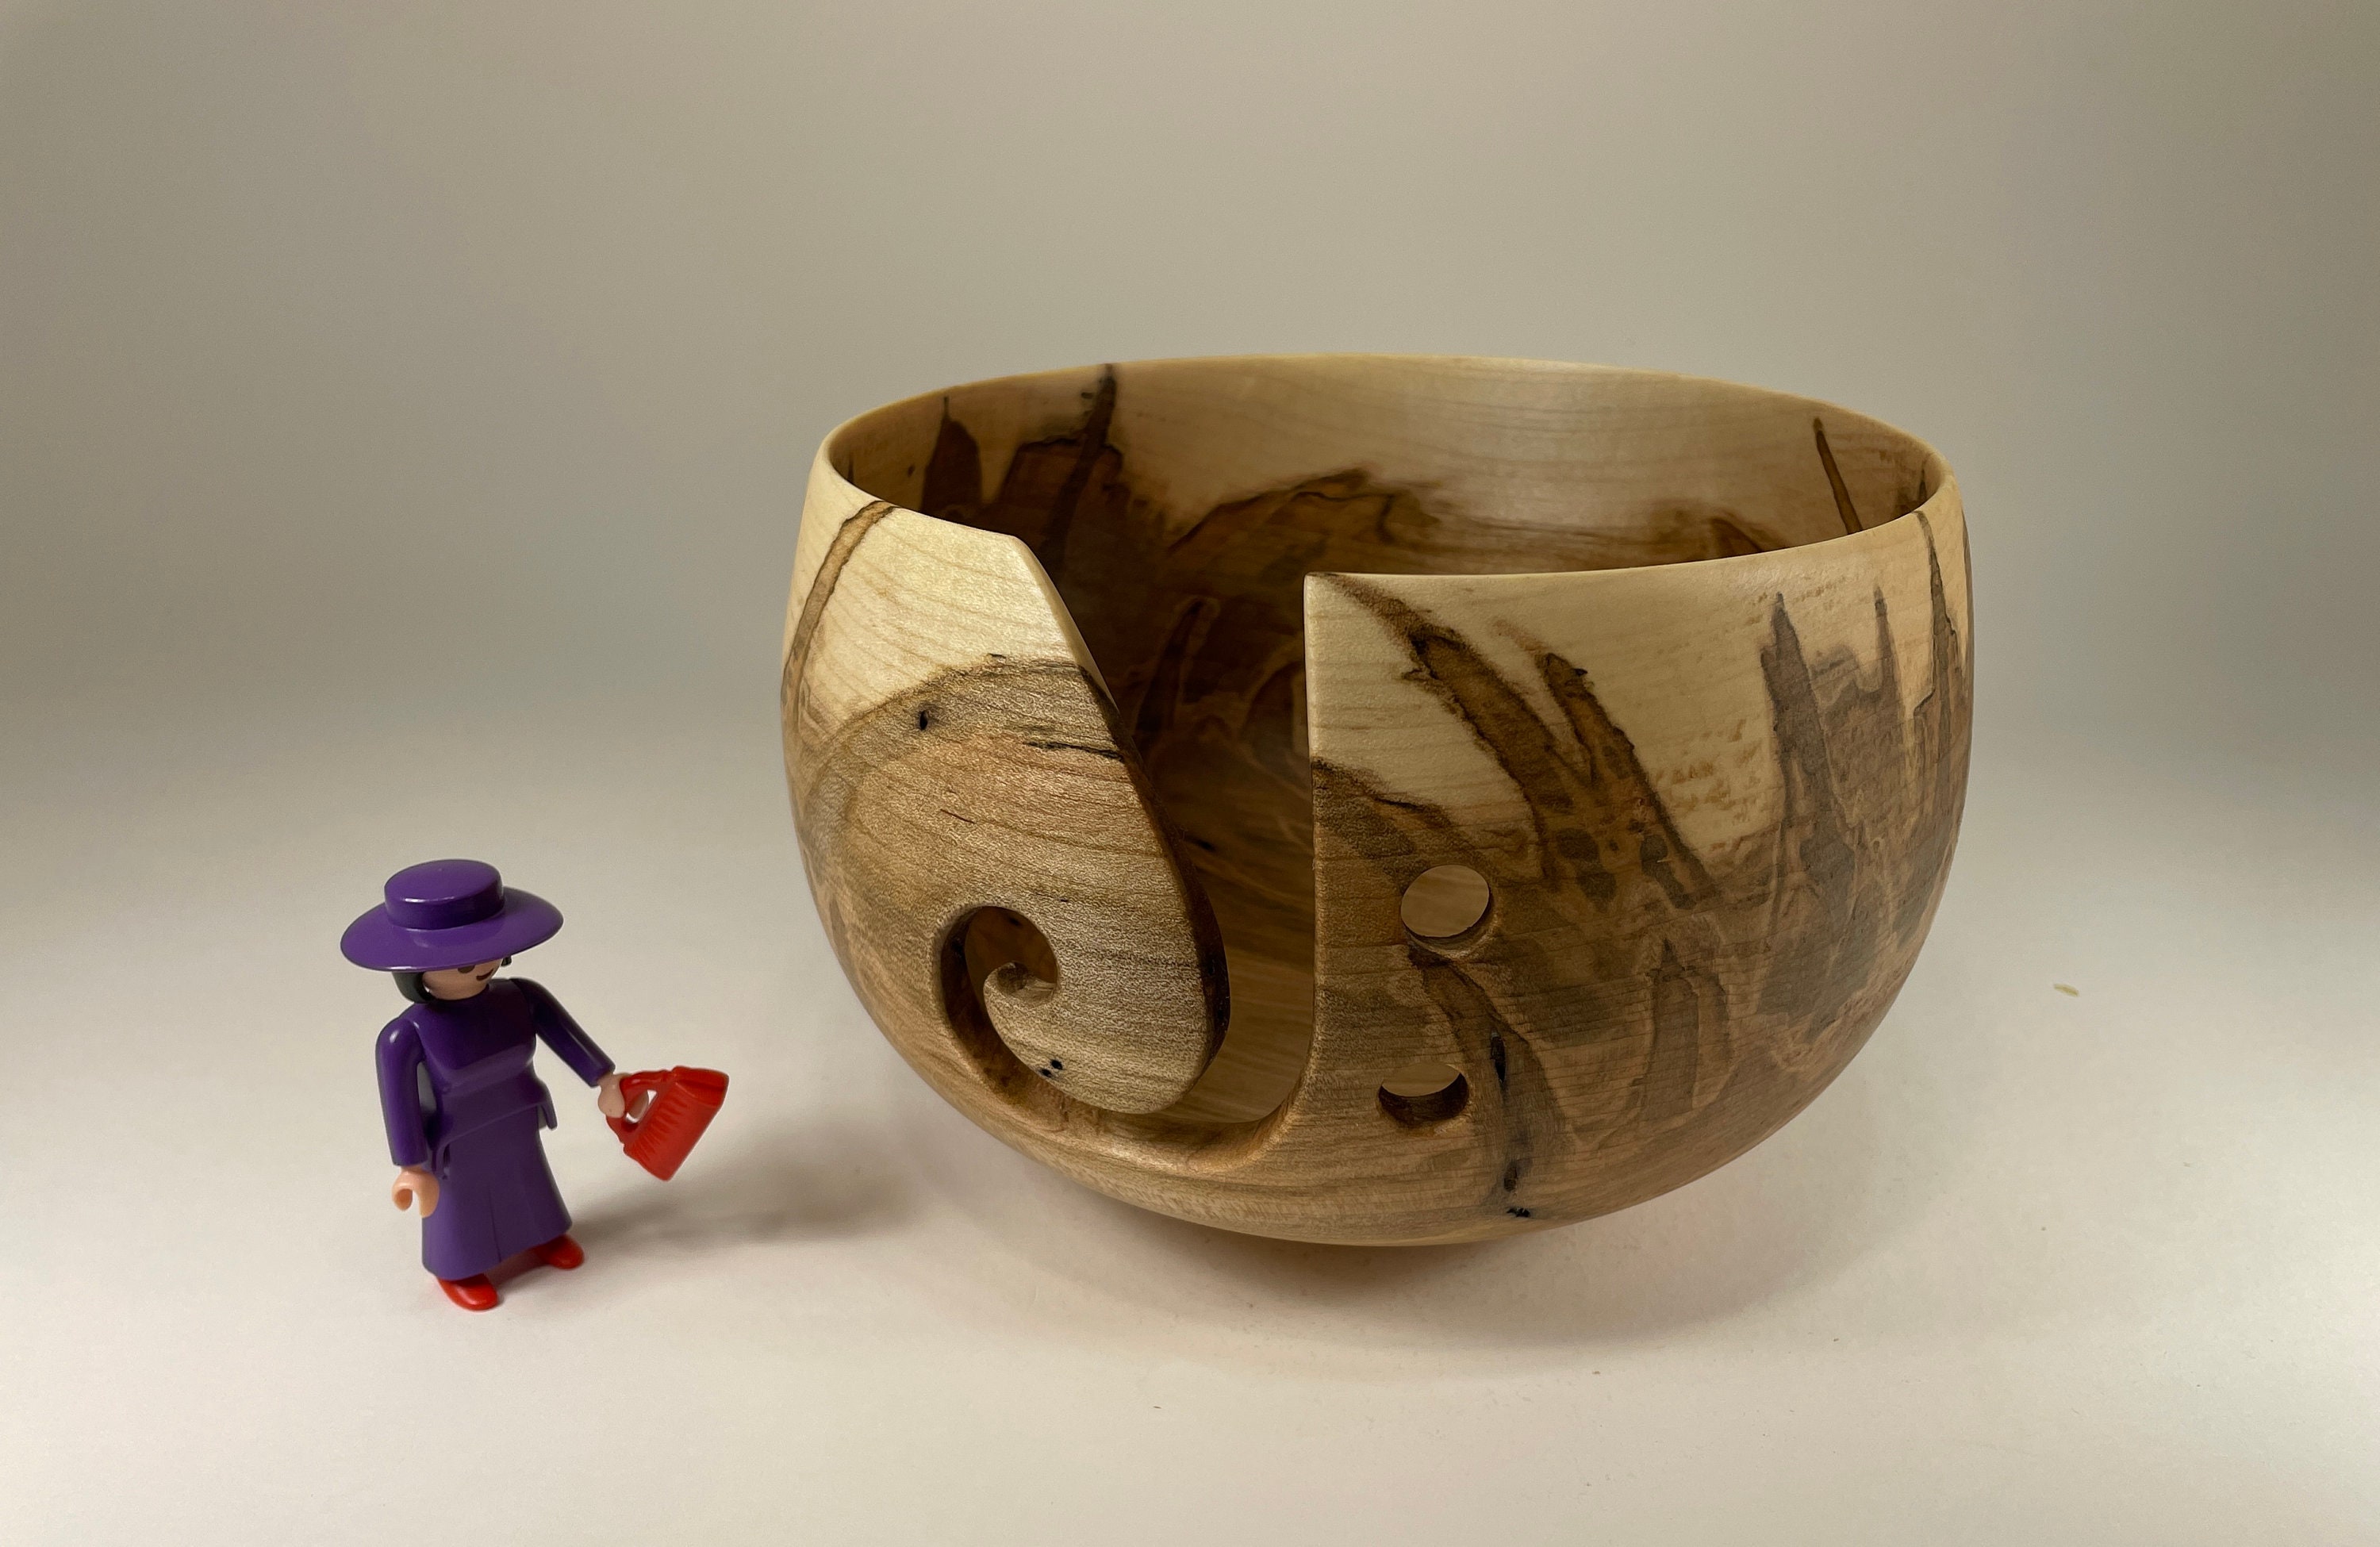 Yarn Holder Bowl with the Lid, Wood, 5.5 Diameter 3.5 Height